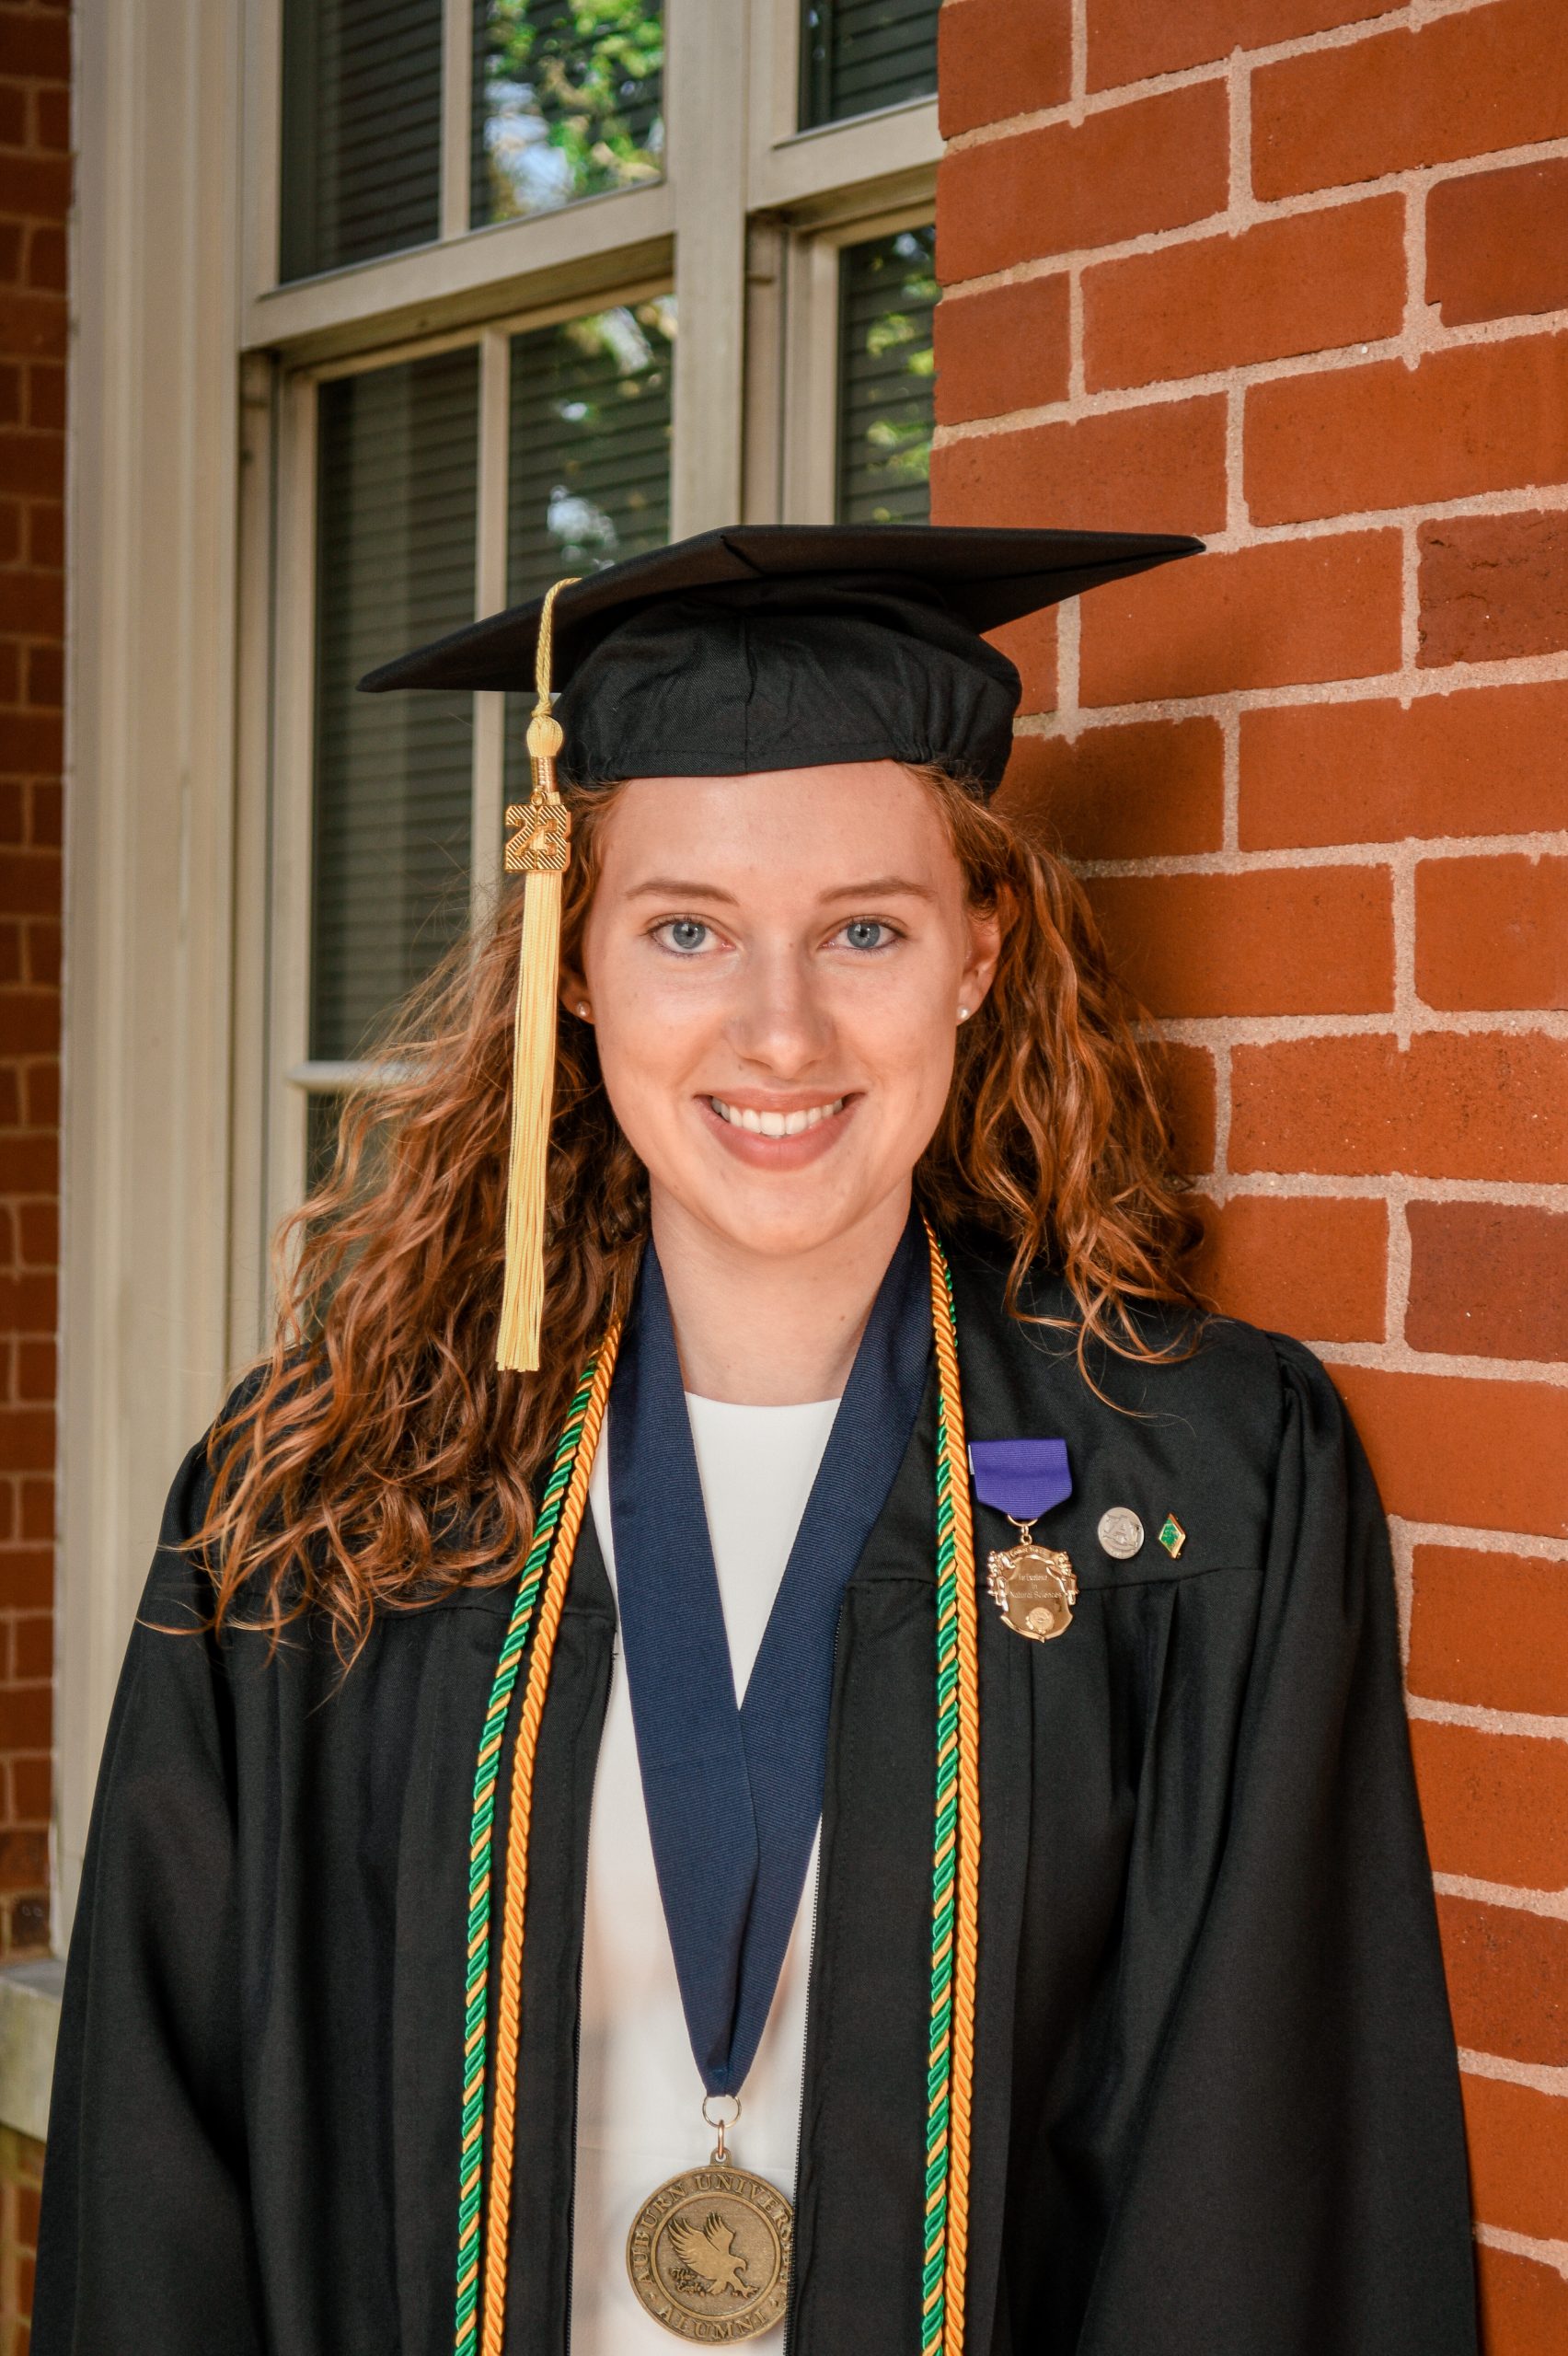 A white young woman with curly red hair wears a cap and gown and a medal around her neck while she leans against a red-brick wall with a window behind her